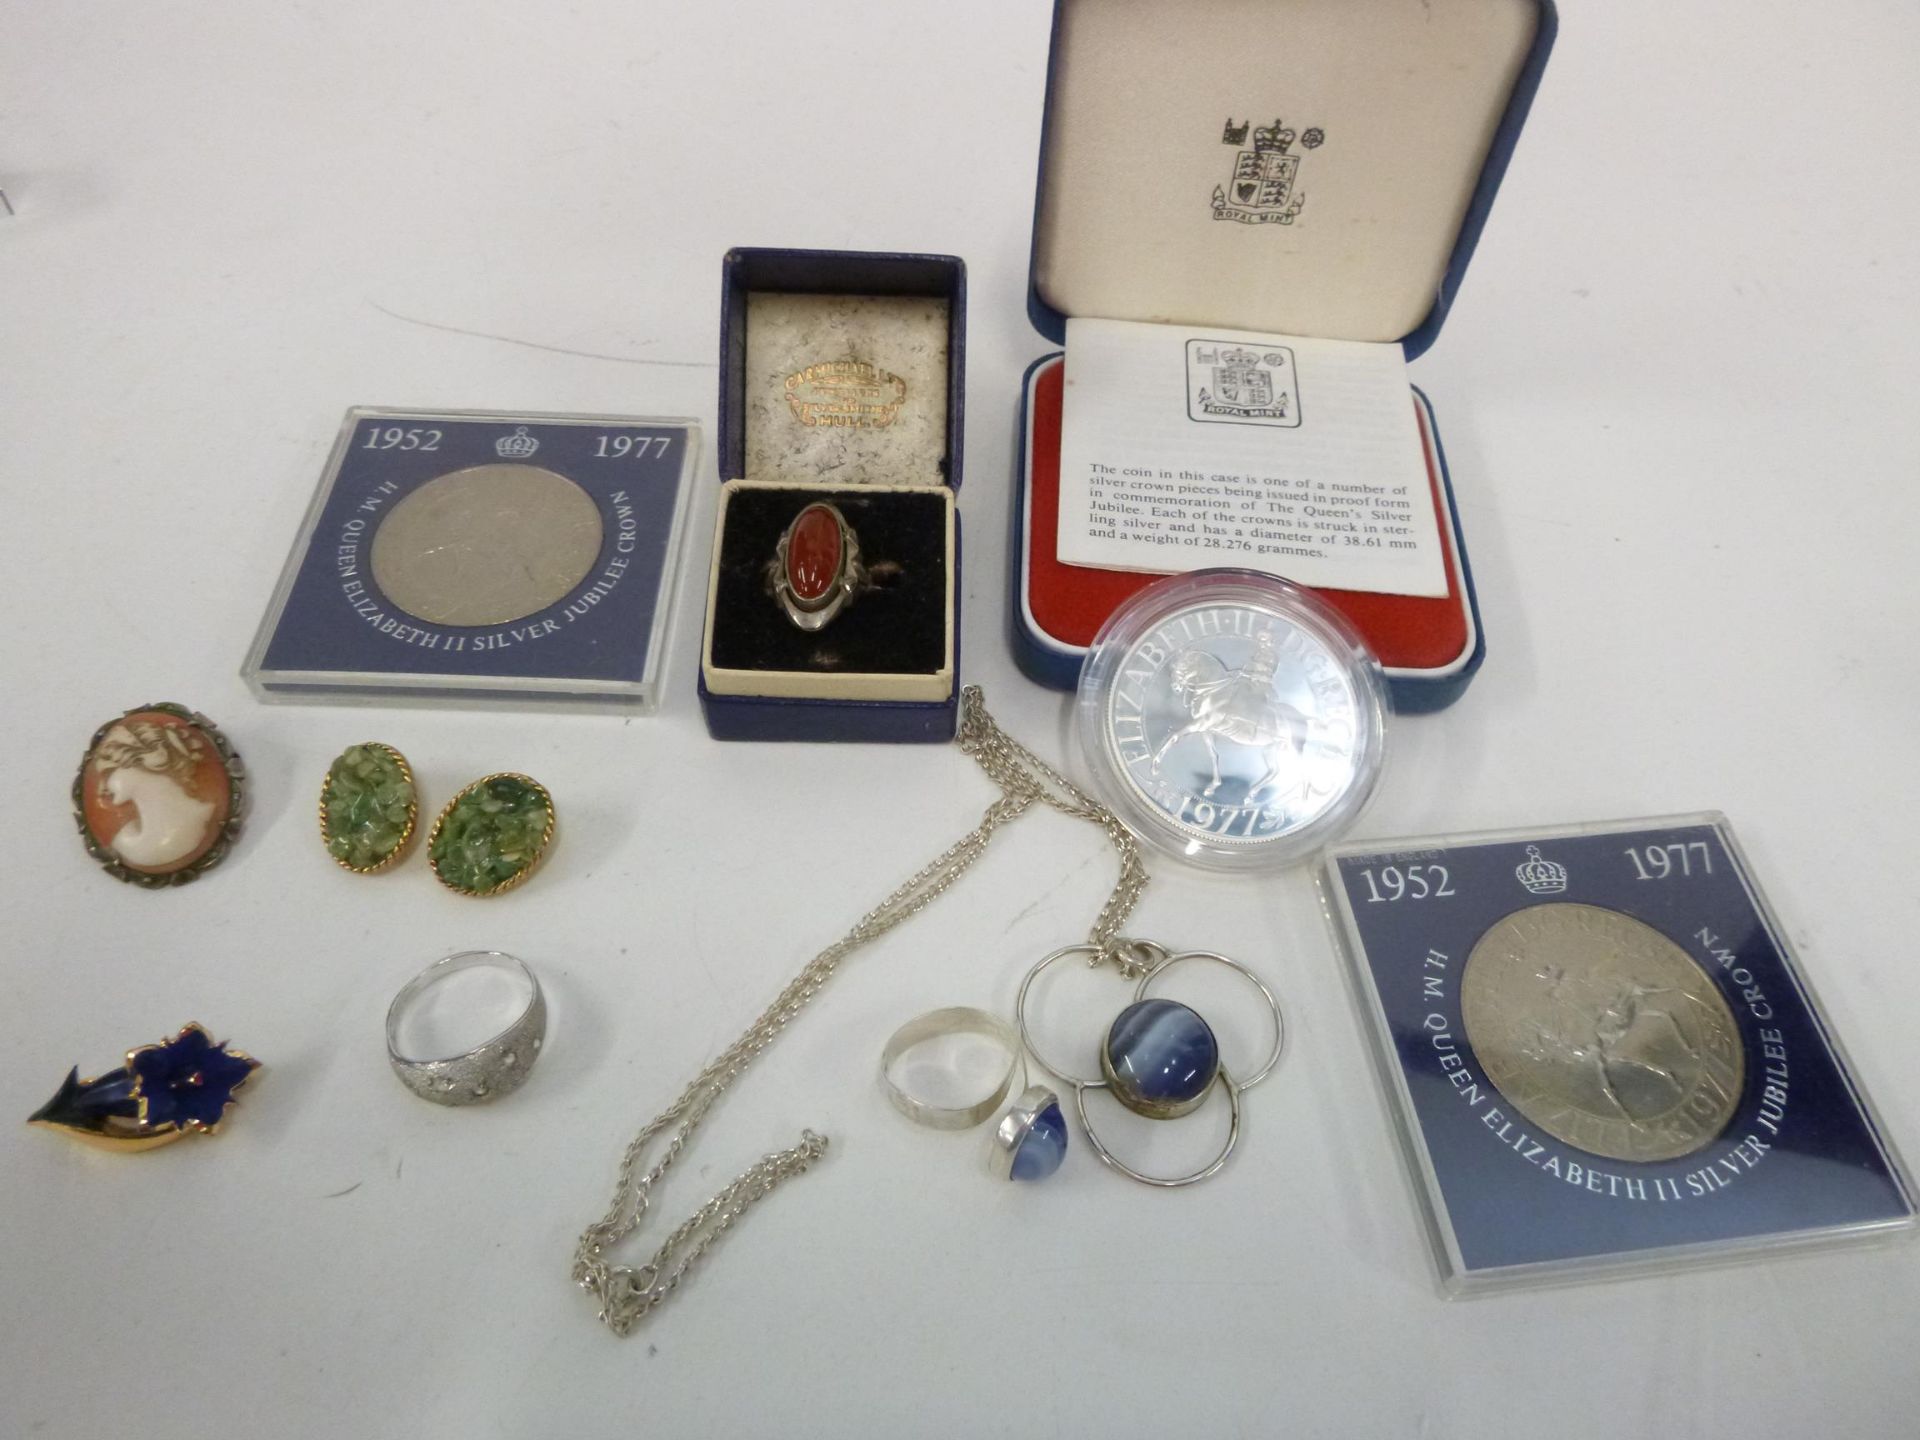 Miscellaneous Silver Costume Jewellery & Coins - Bar Brooch, Rings, Cameo Brooch, 1977 Crowns